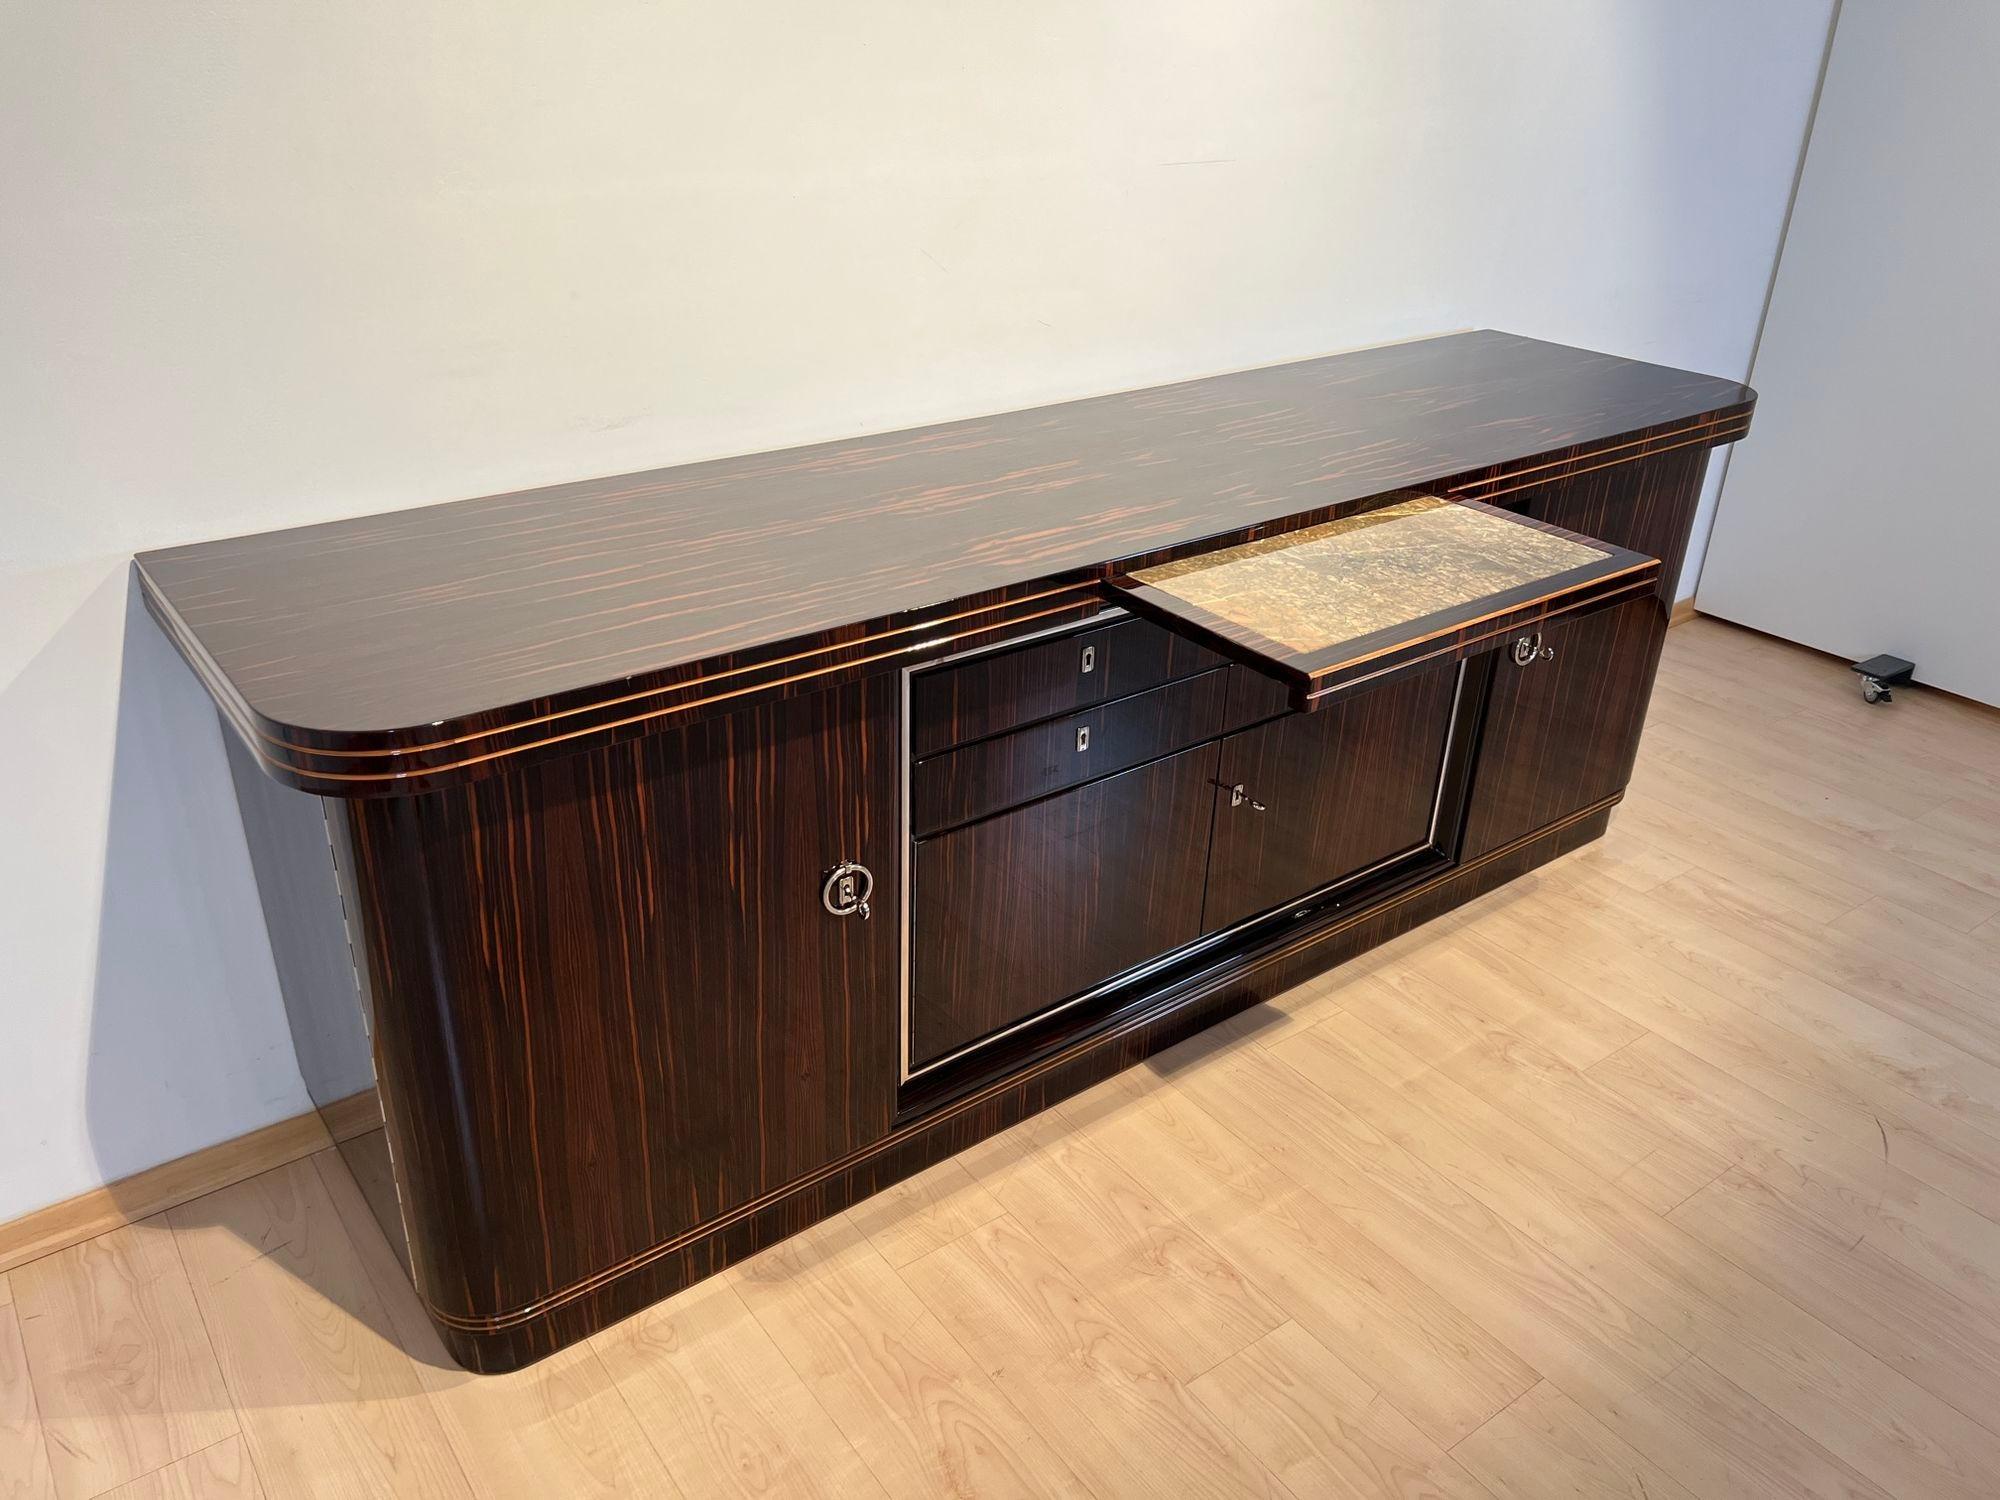 Large Art Deco Sideboard, Macassar Ebony, Maple, Chrome, France circa 1930 In Good Condition For Sale In Regensburg, DE